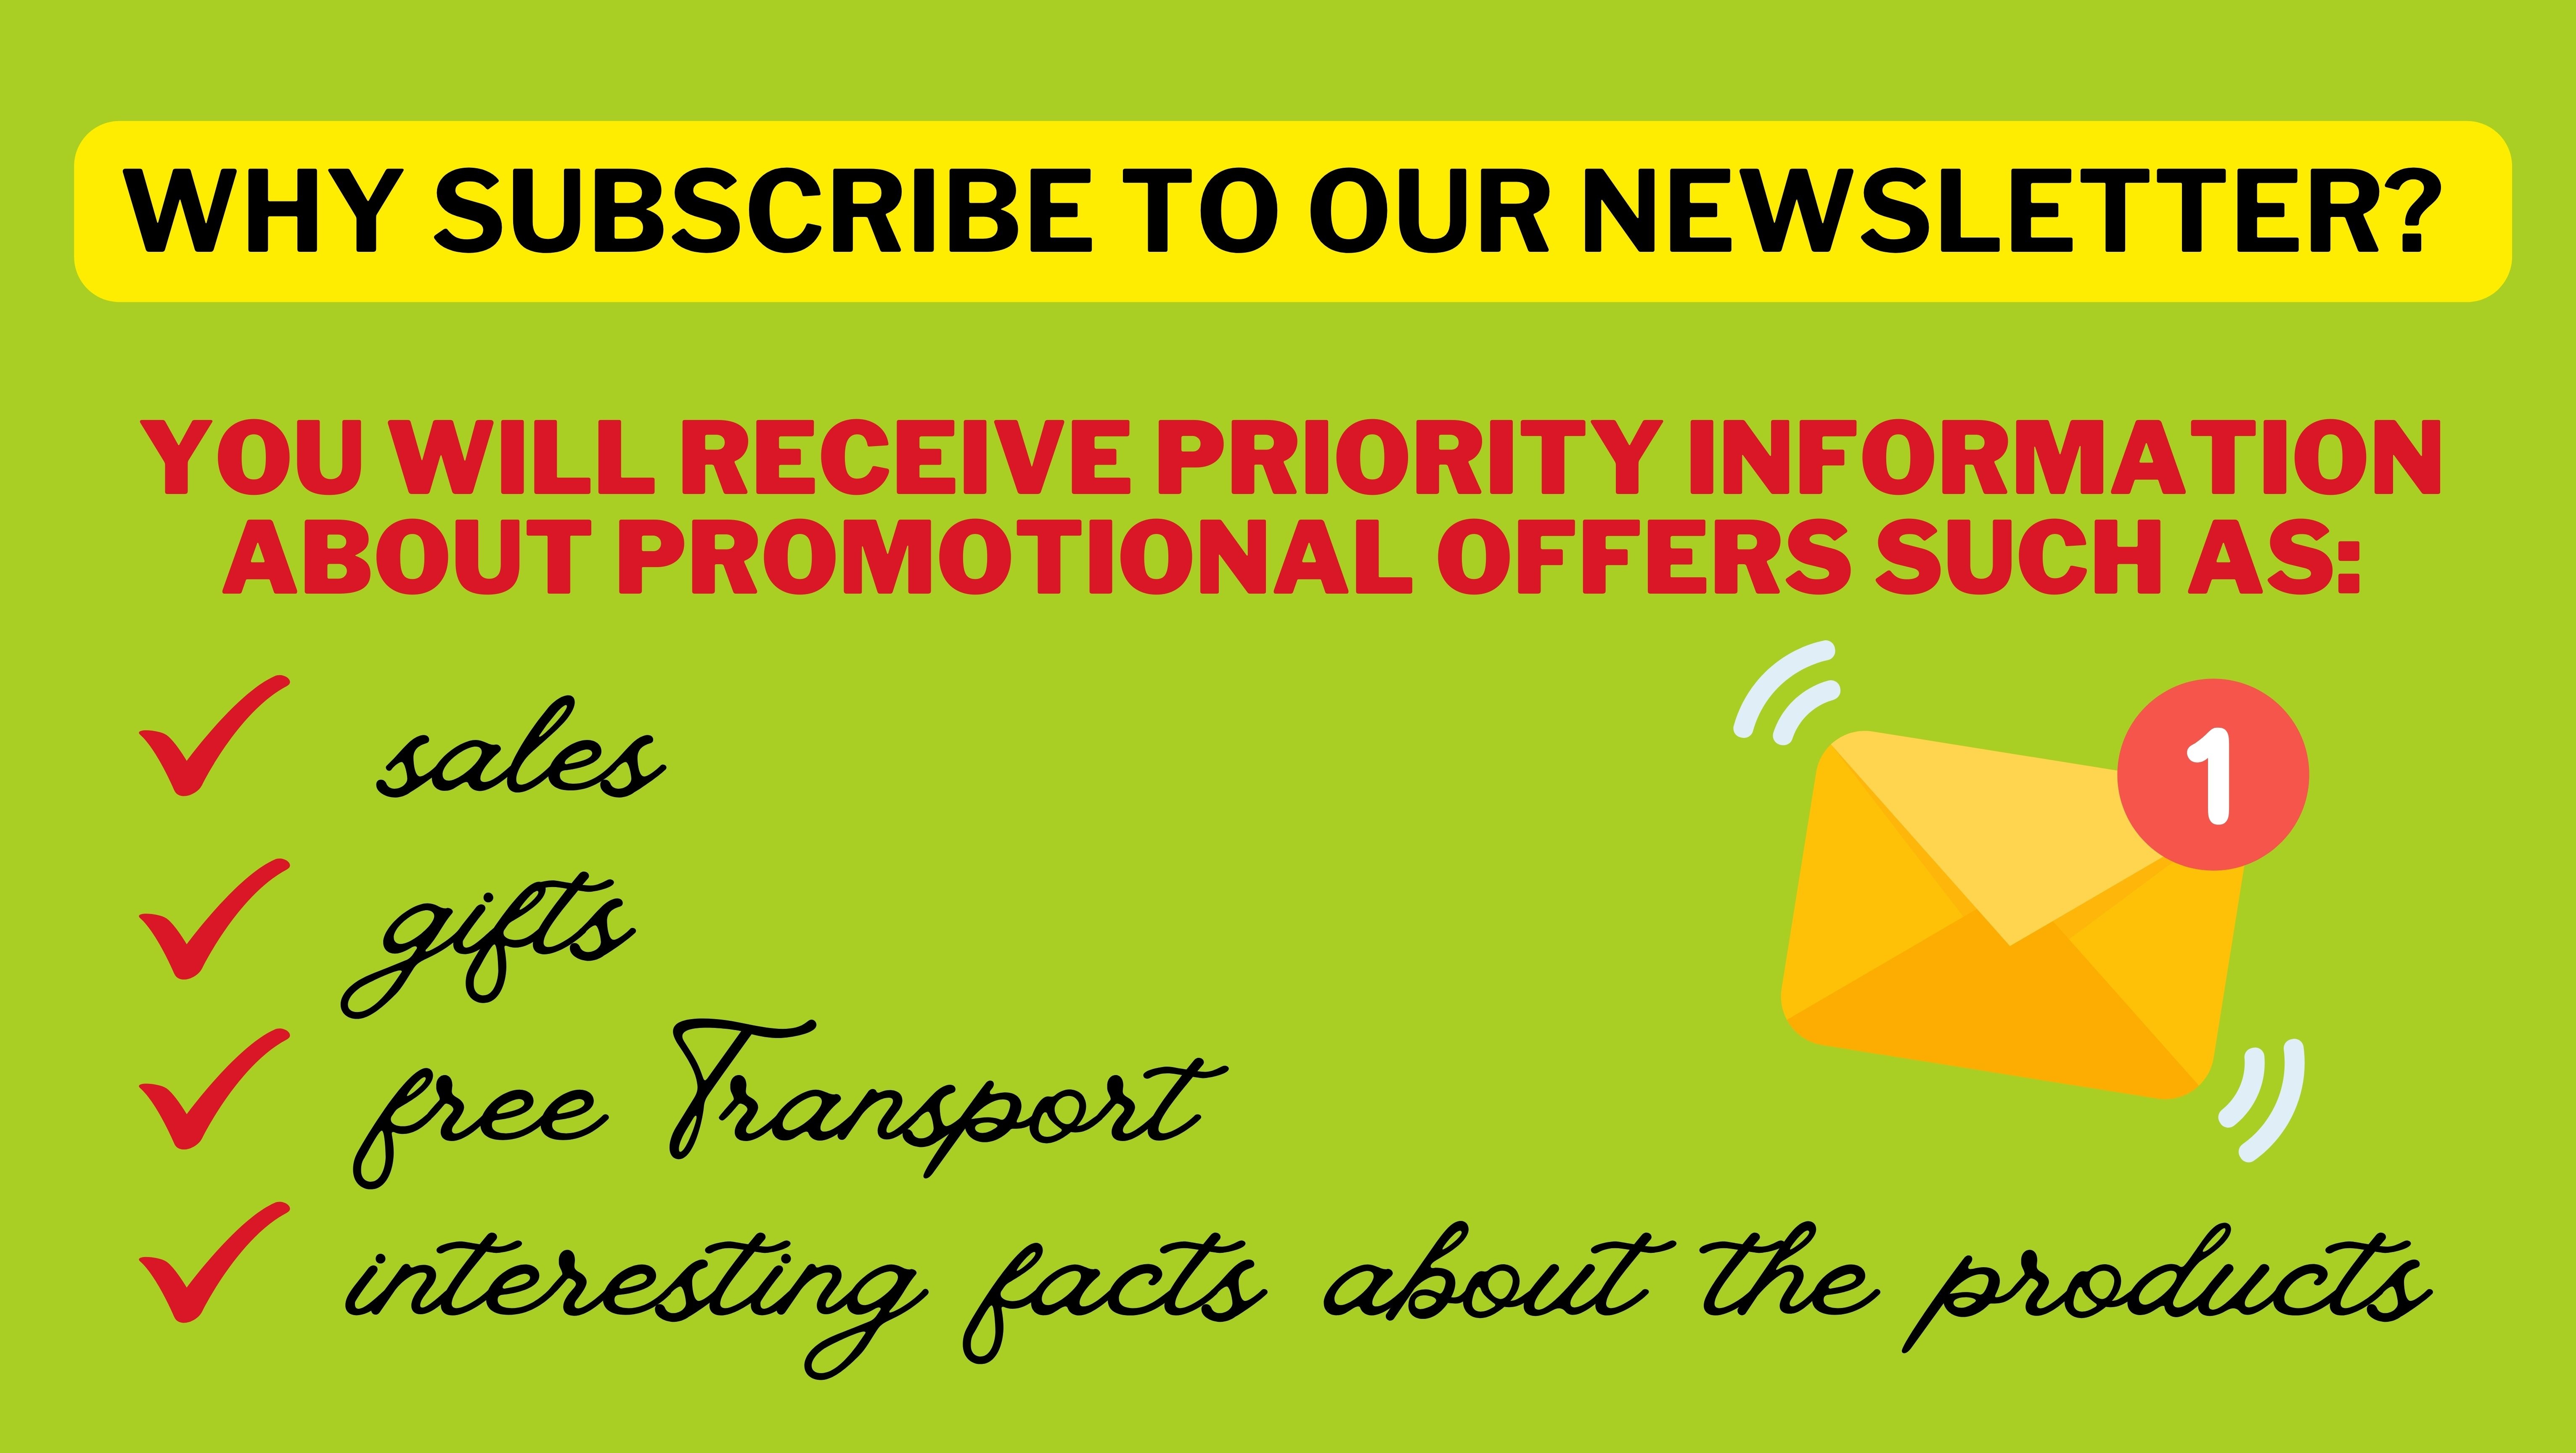 Why subscribe to our newsletter?